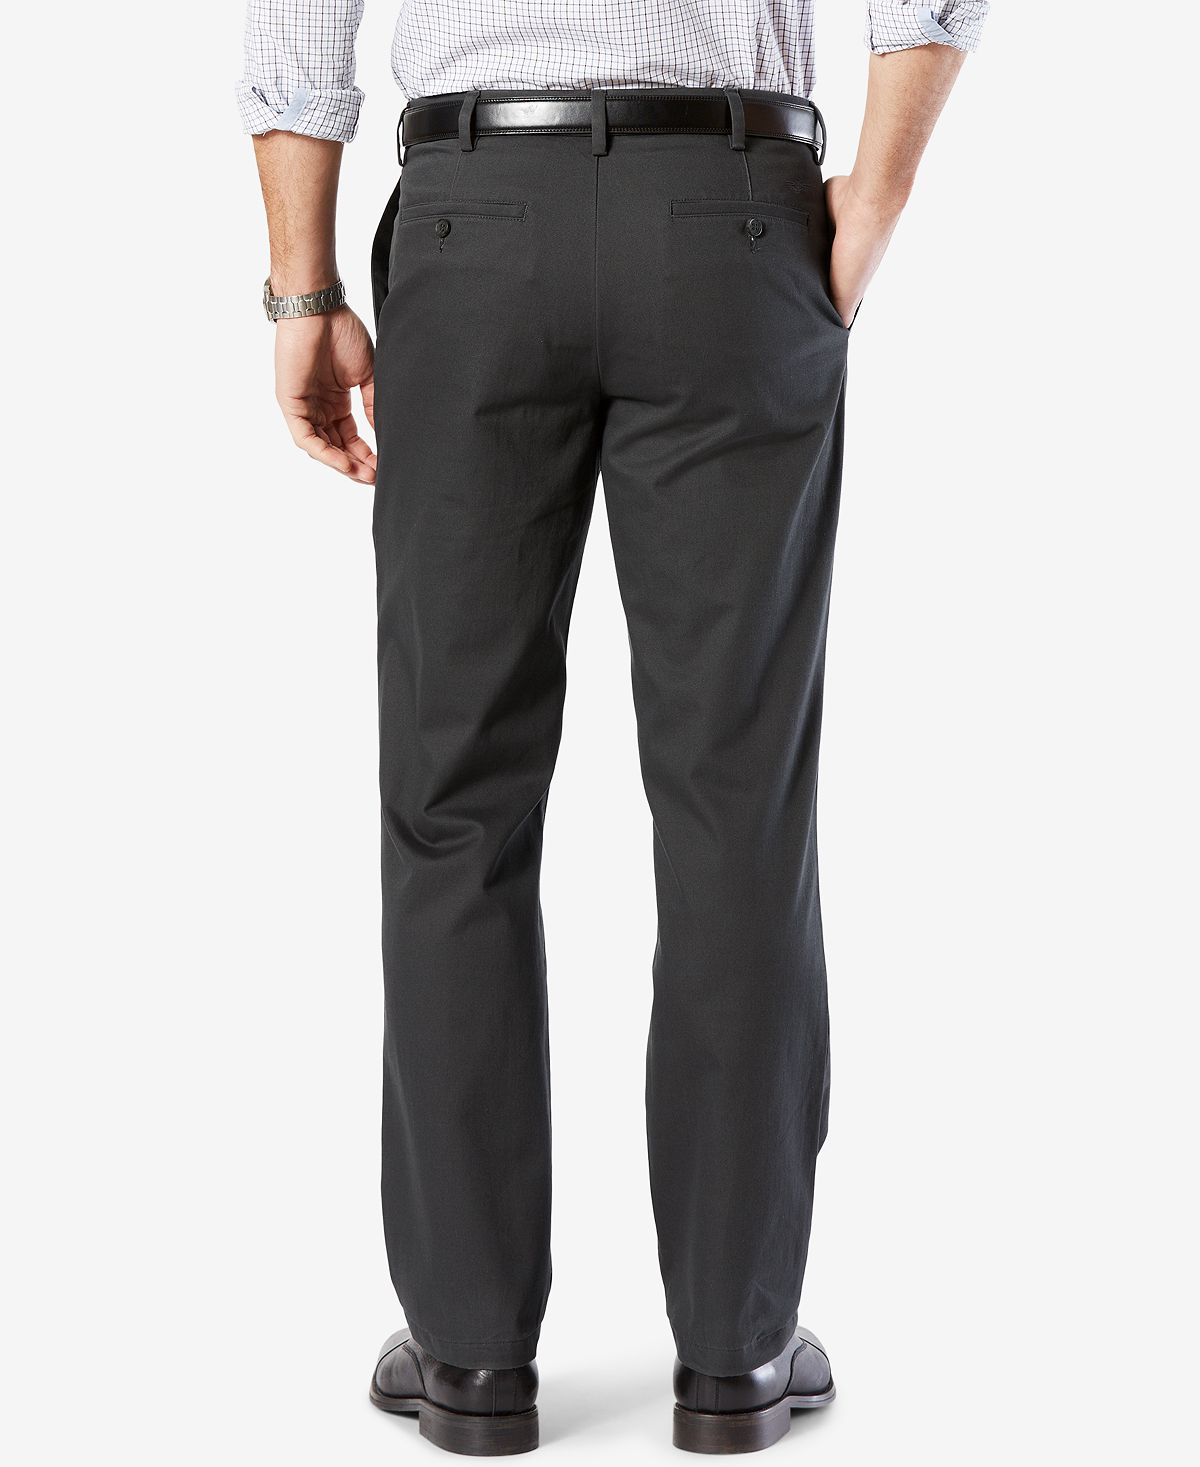 Dockers ' Signature Lux Cotton Straight Fit Stretch Khaki Pants Charcoal Heather